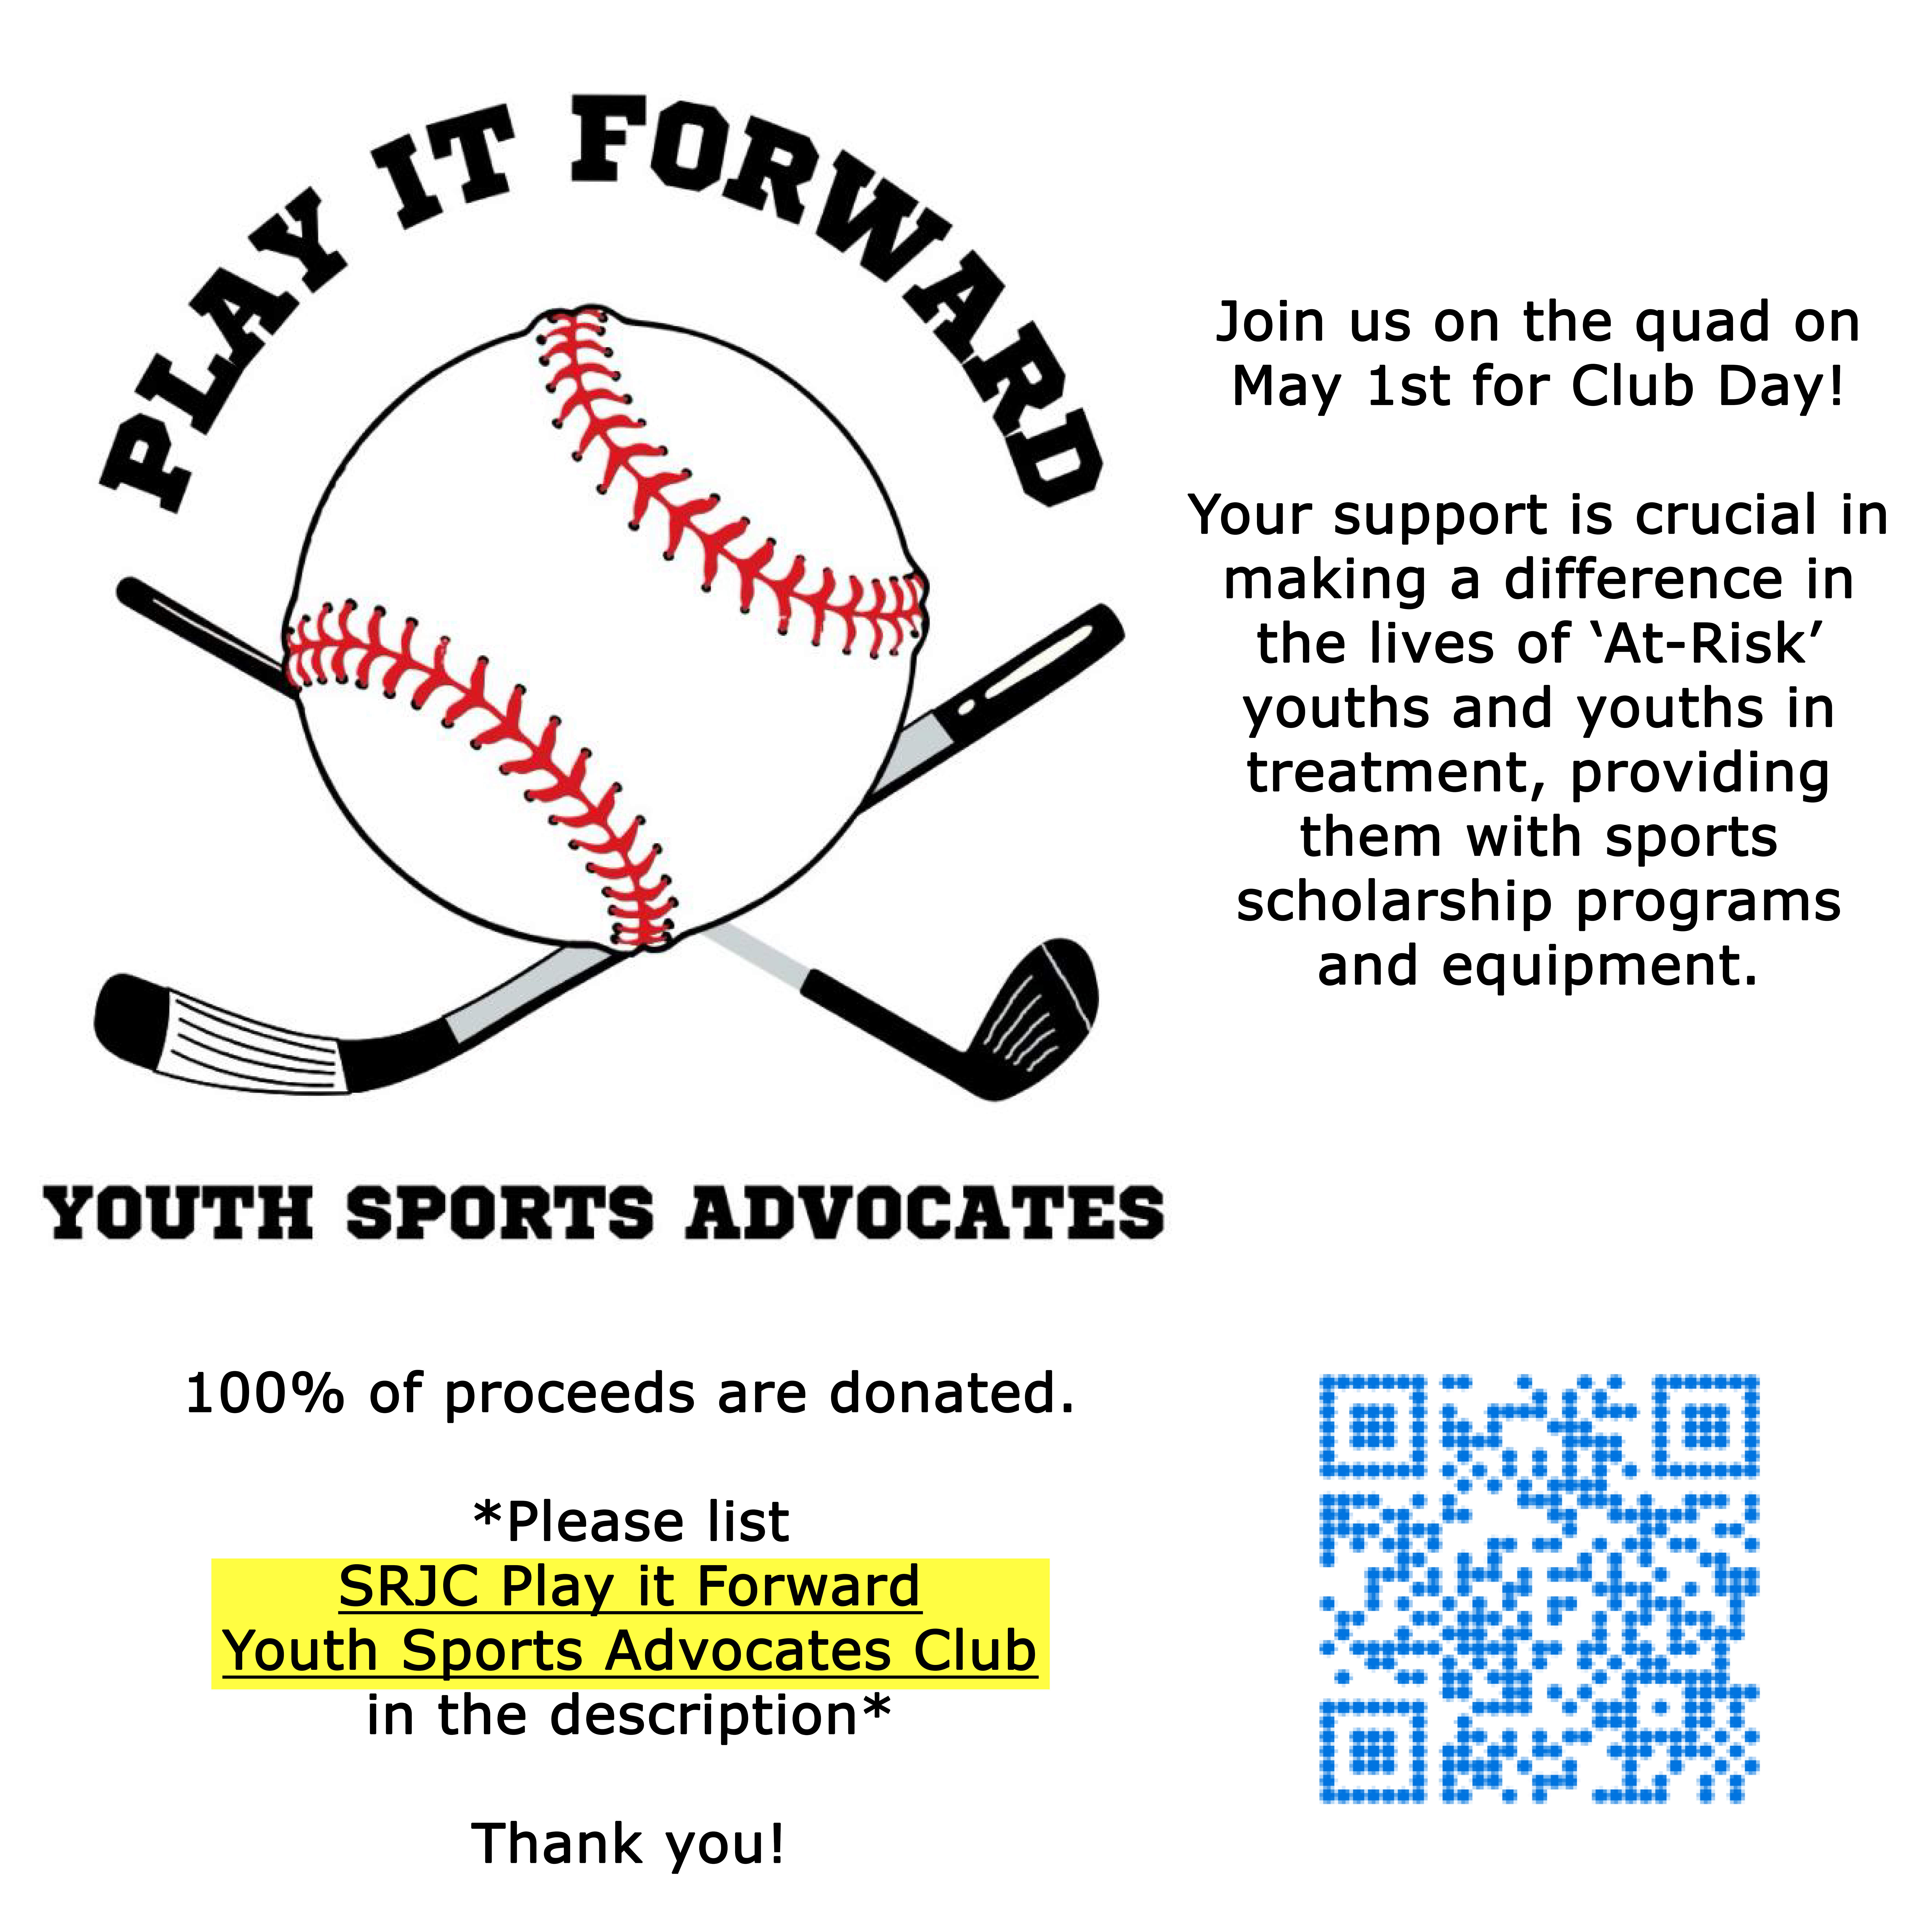 Play It Forward Youth Sports Advocates. Join us on the quad on May 1st for club day. Your support is crucial in making a difference in the lives of “At-Risk” youths and youths in treatment, providing them with sports scholarship programs and equipment. 100% of all proceeds are donated. **Please list SRJC Play It Forward Youth Sports Advocates Club in the description.** Thank you! https://studentlife.santarosa.edu/play-it-forward-youth-sports-advocates-club